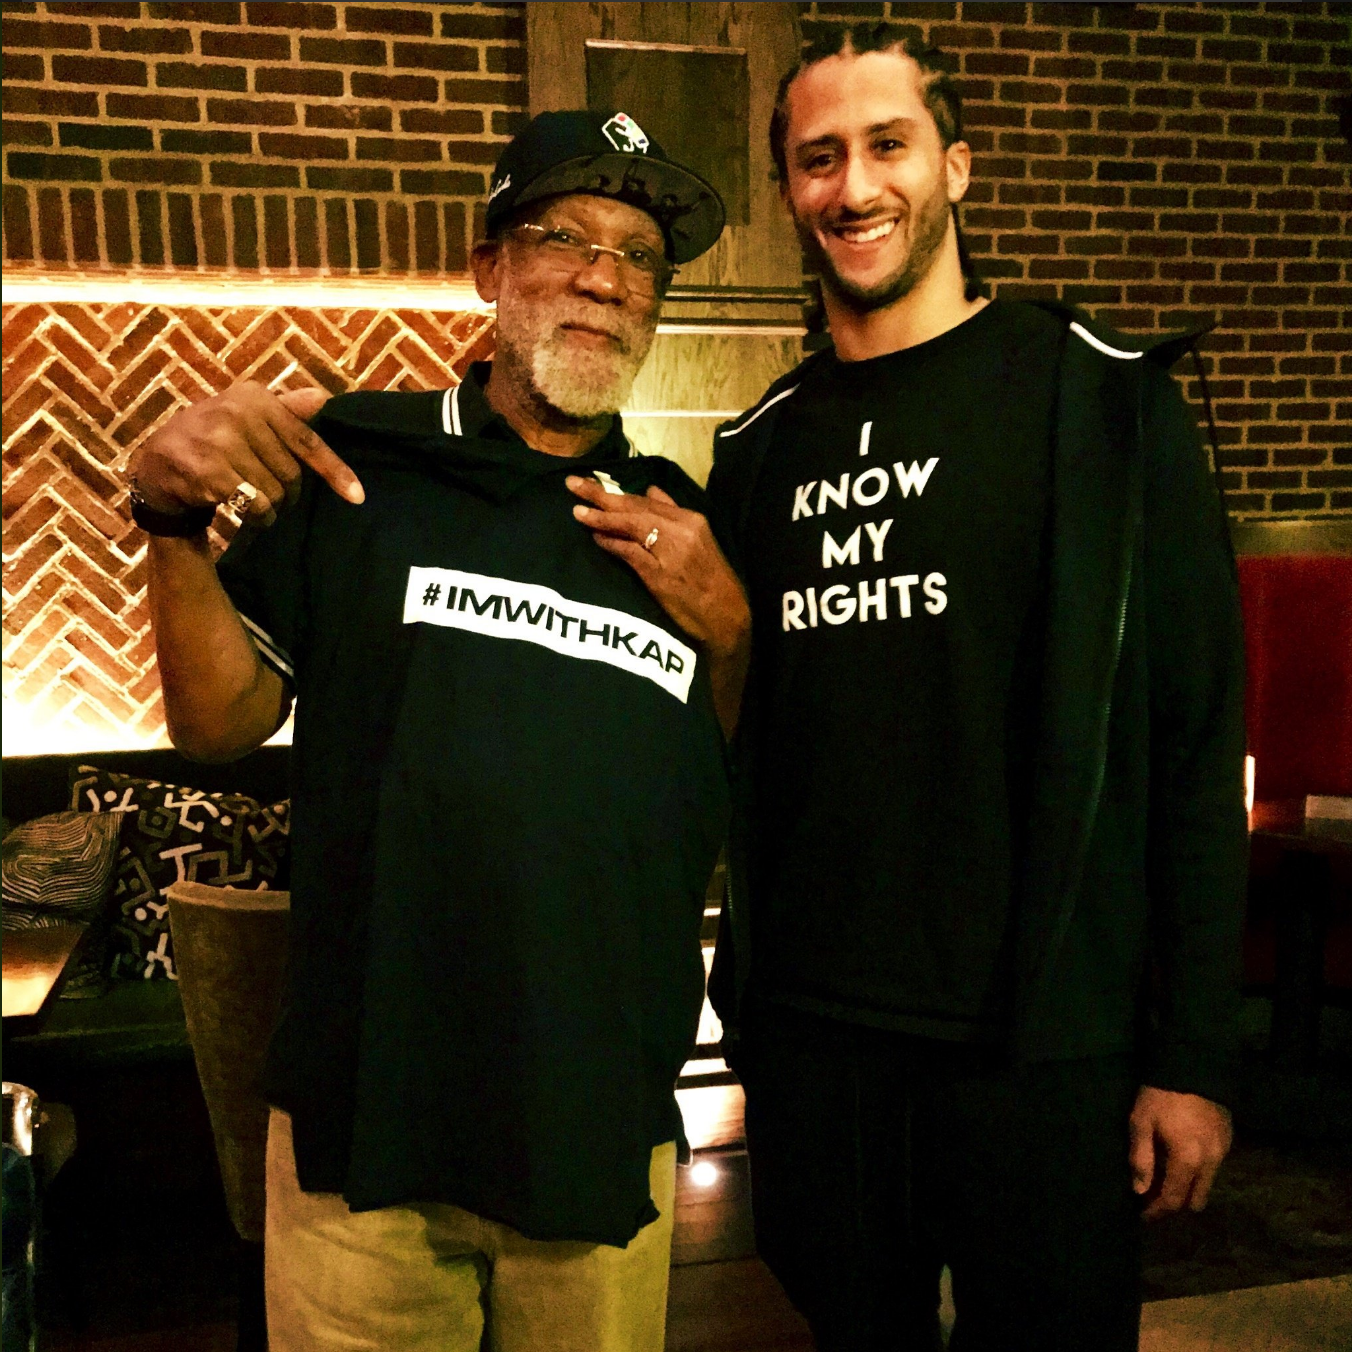 Colin Kaepernick Shares Memorable Moment With Iconic Olympians Tommie Smith And John Carlos
